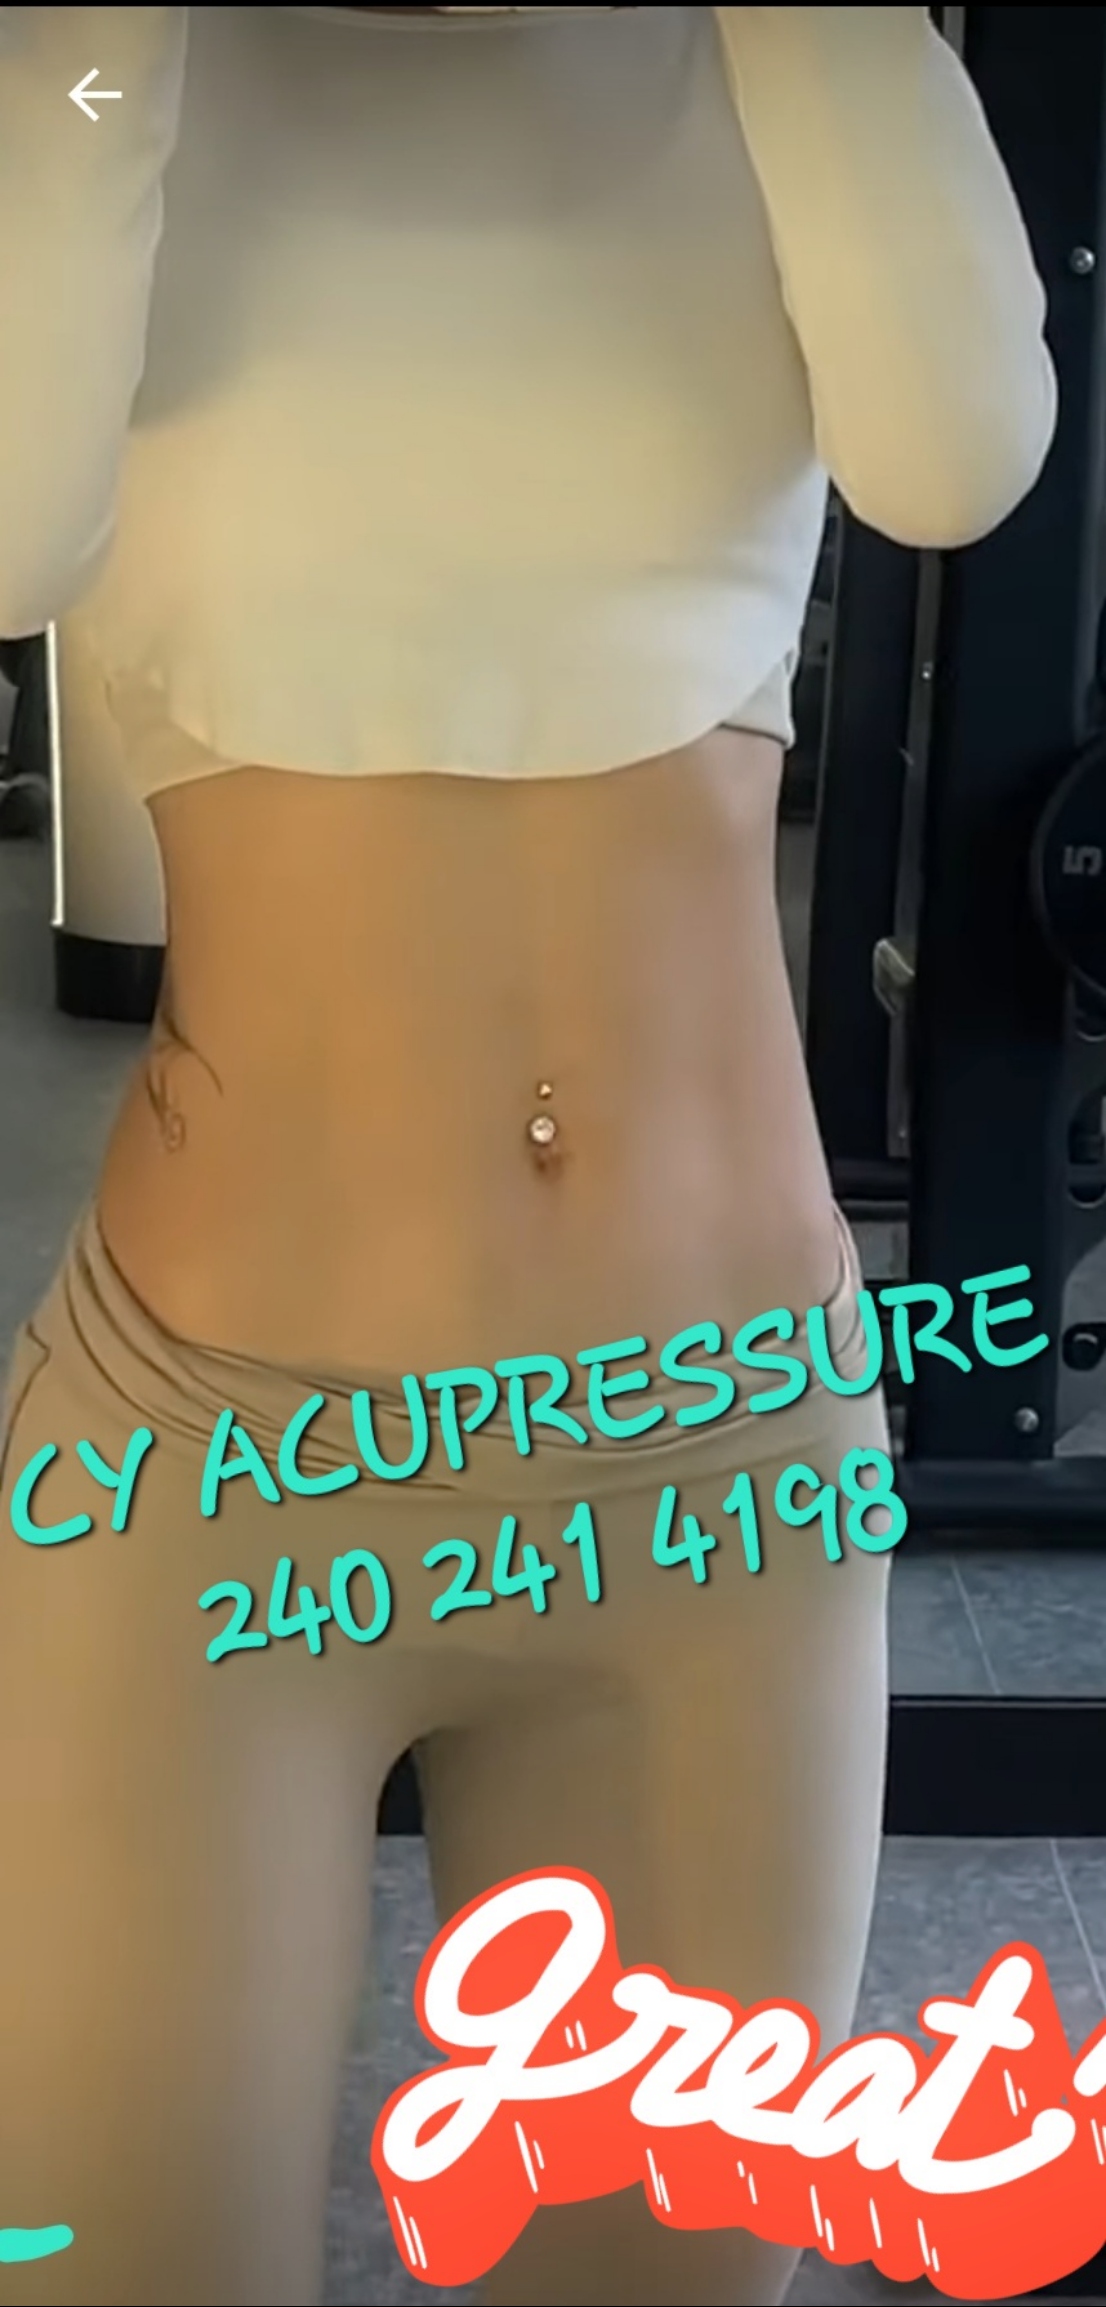 CY ACUPRESSURE | 7335 Hanover Pkwy suite C, Greenbelt, MD 20770, United States | Phone: (240) 241-4198